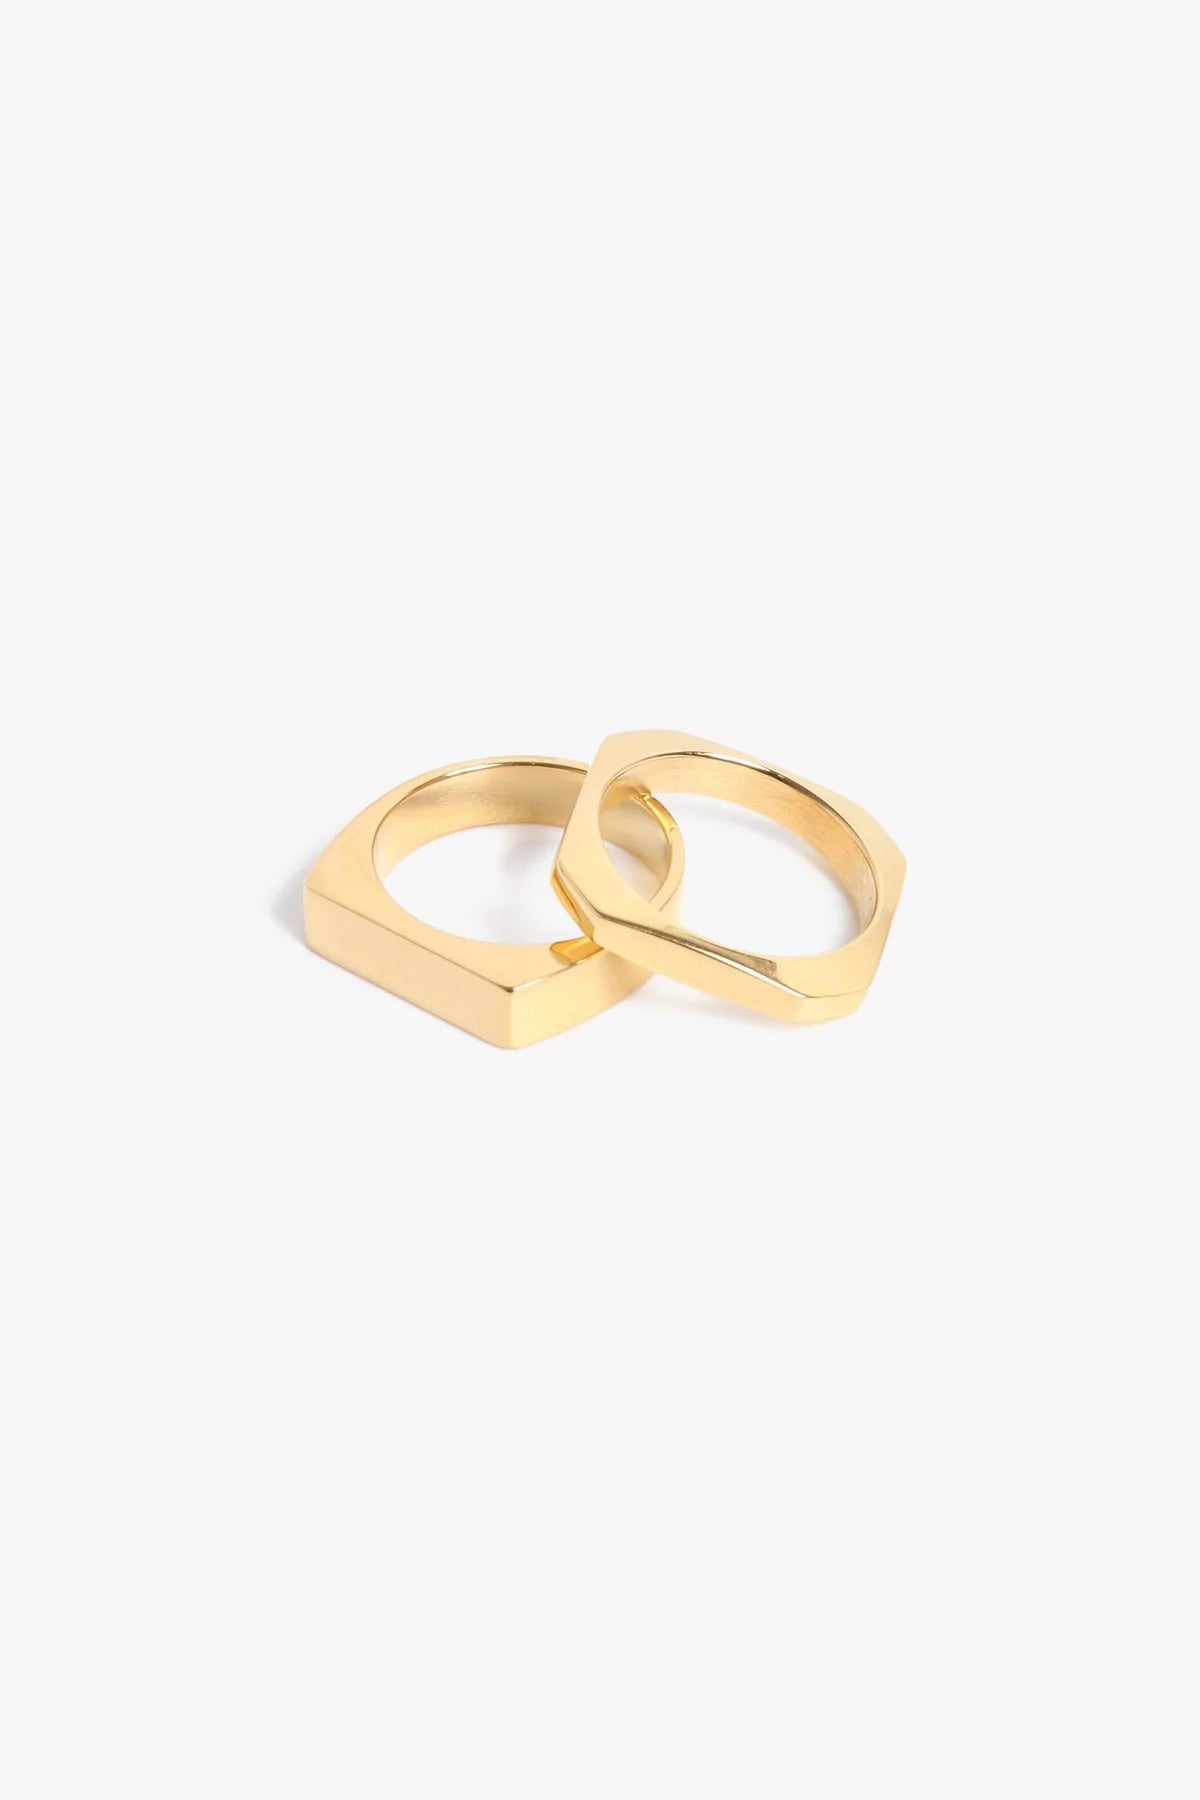 Marrin Costello - Hendrix Two Ring Stack - Gold